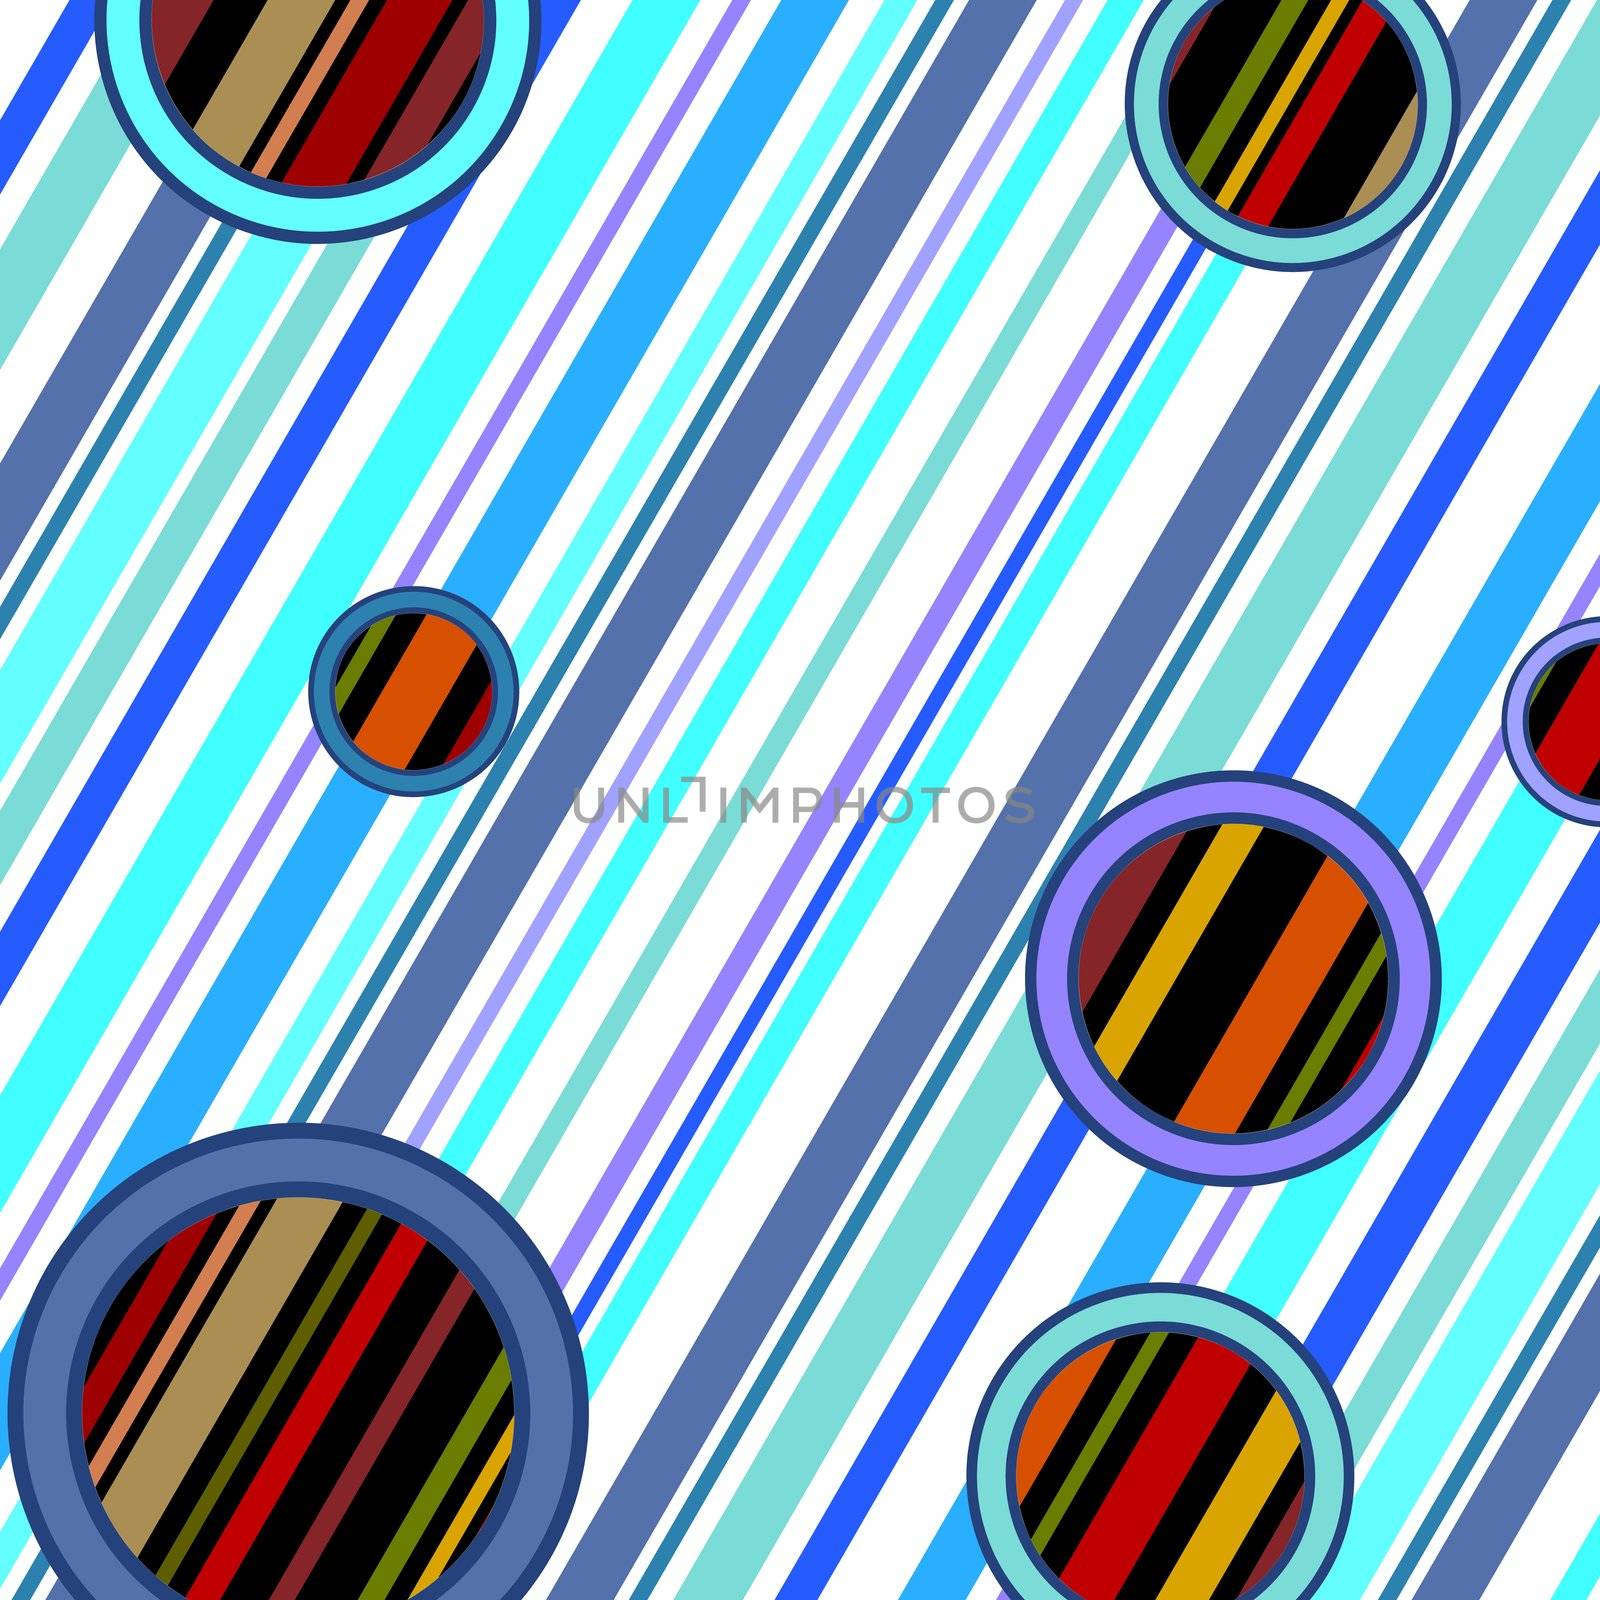 stripes and circles retro pattern by robertosch